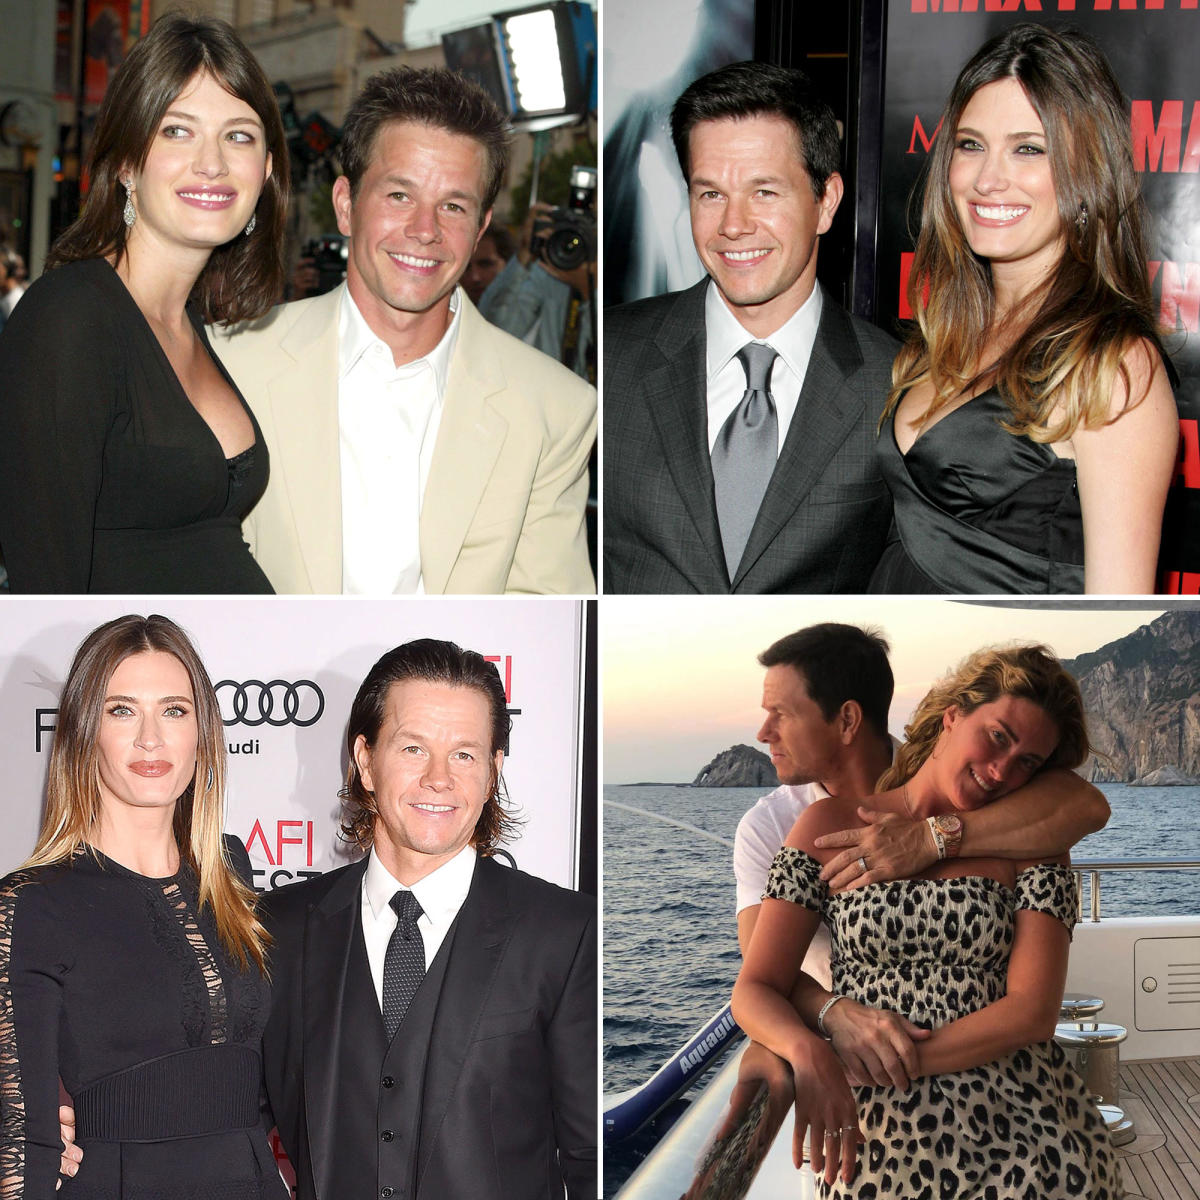 Mark Wahlberg and wife celebrate wonderful family news after